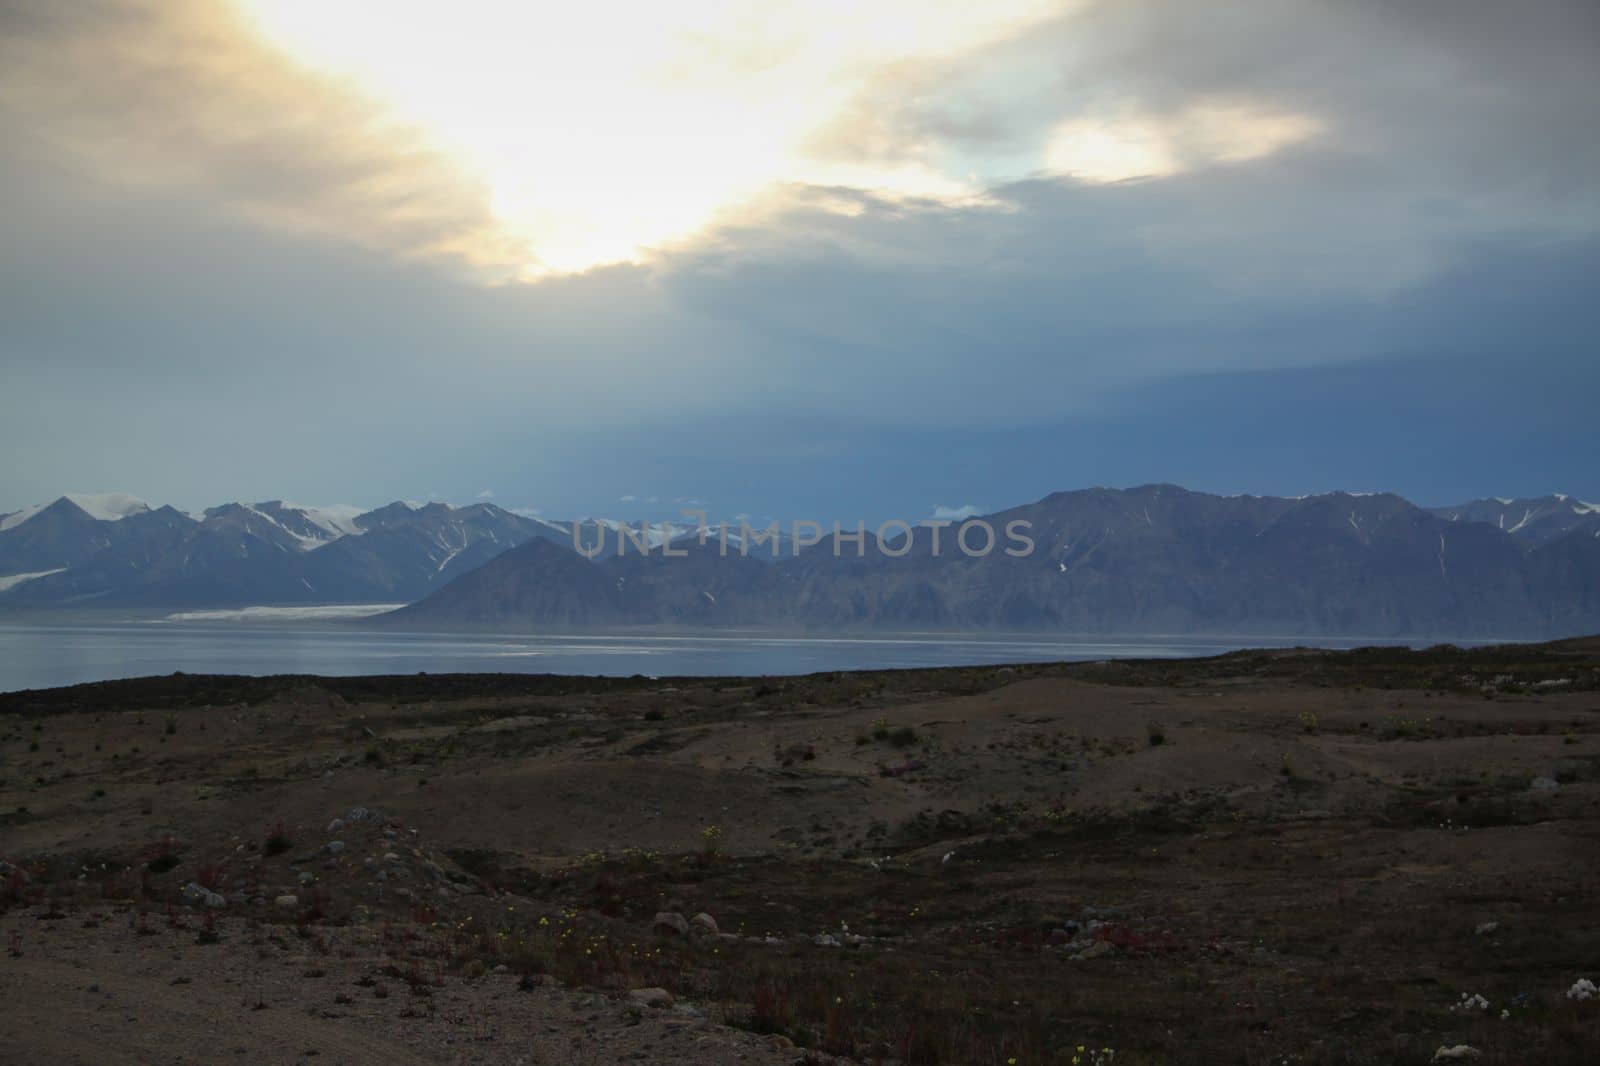 View of mountains across the bay from the community of Pond Inlet, Nunavut, Canada by Granchinho